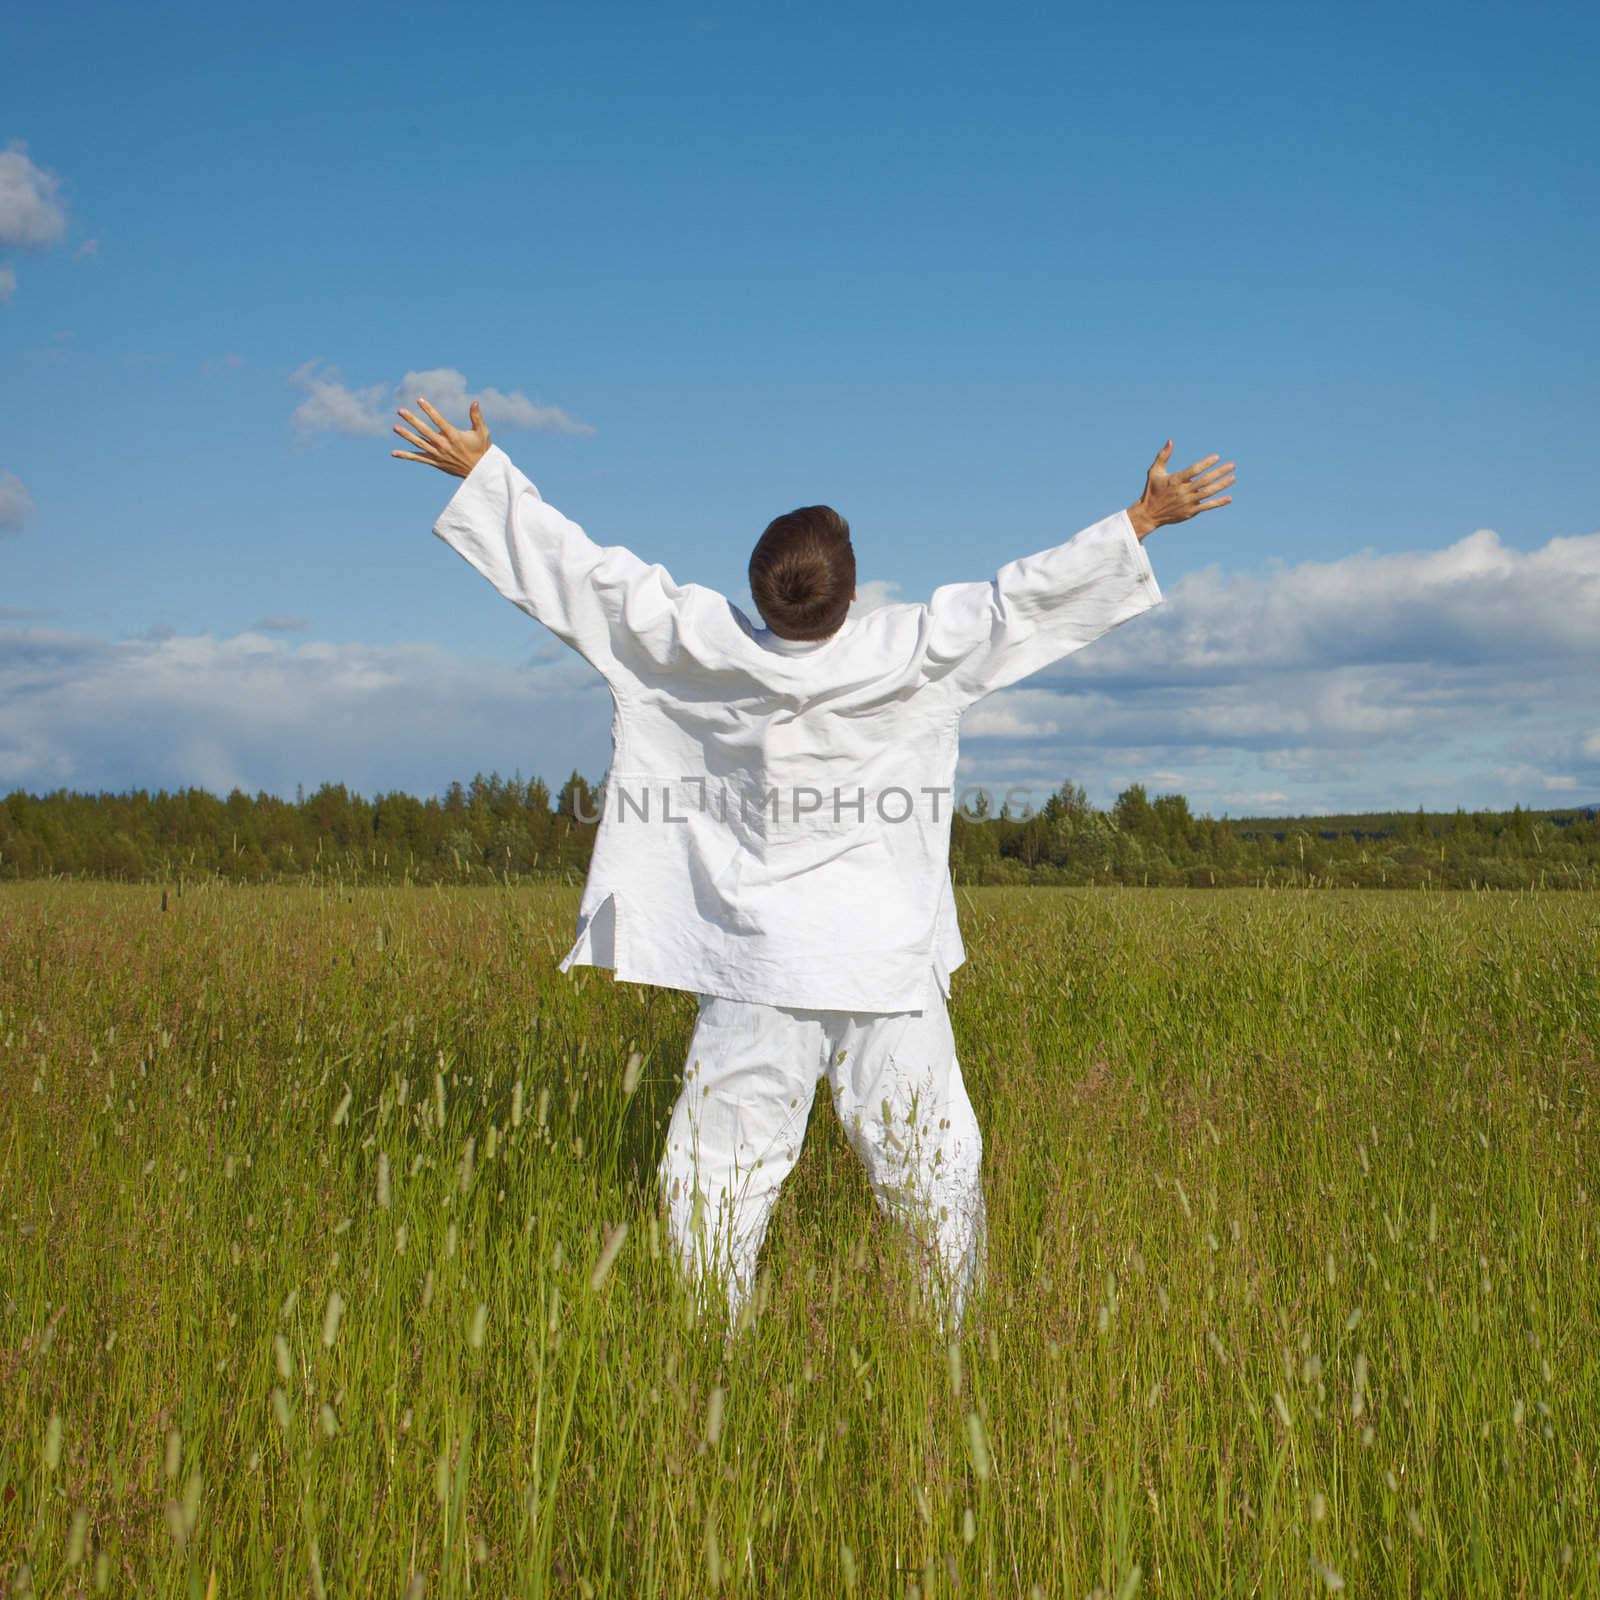 Man enjoys nature and fresh air while standing in a field